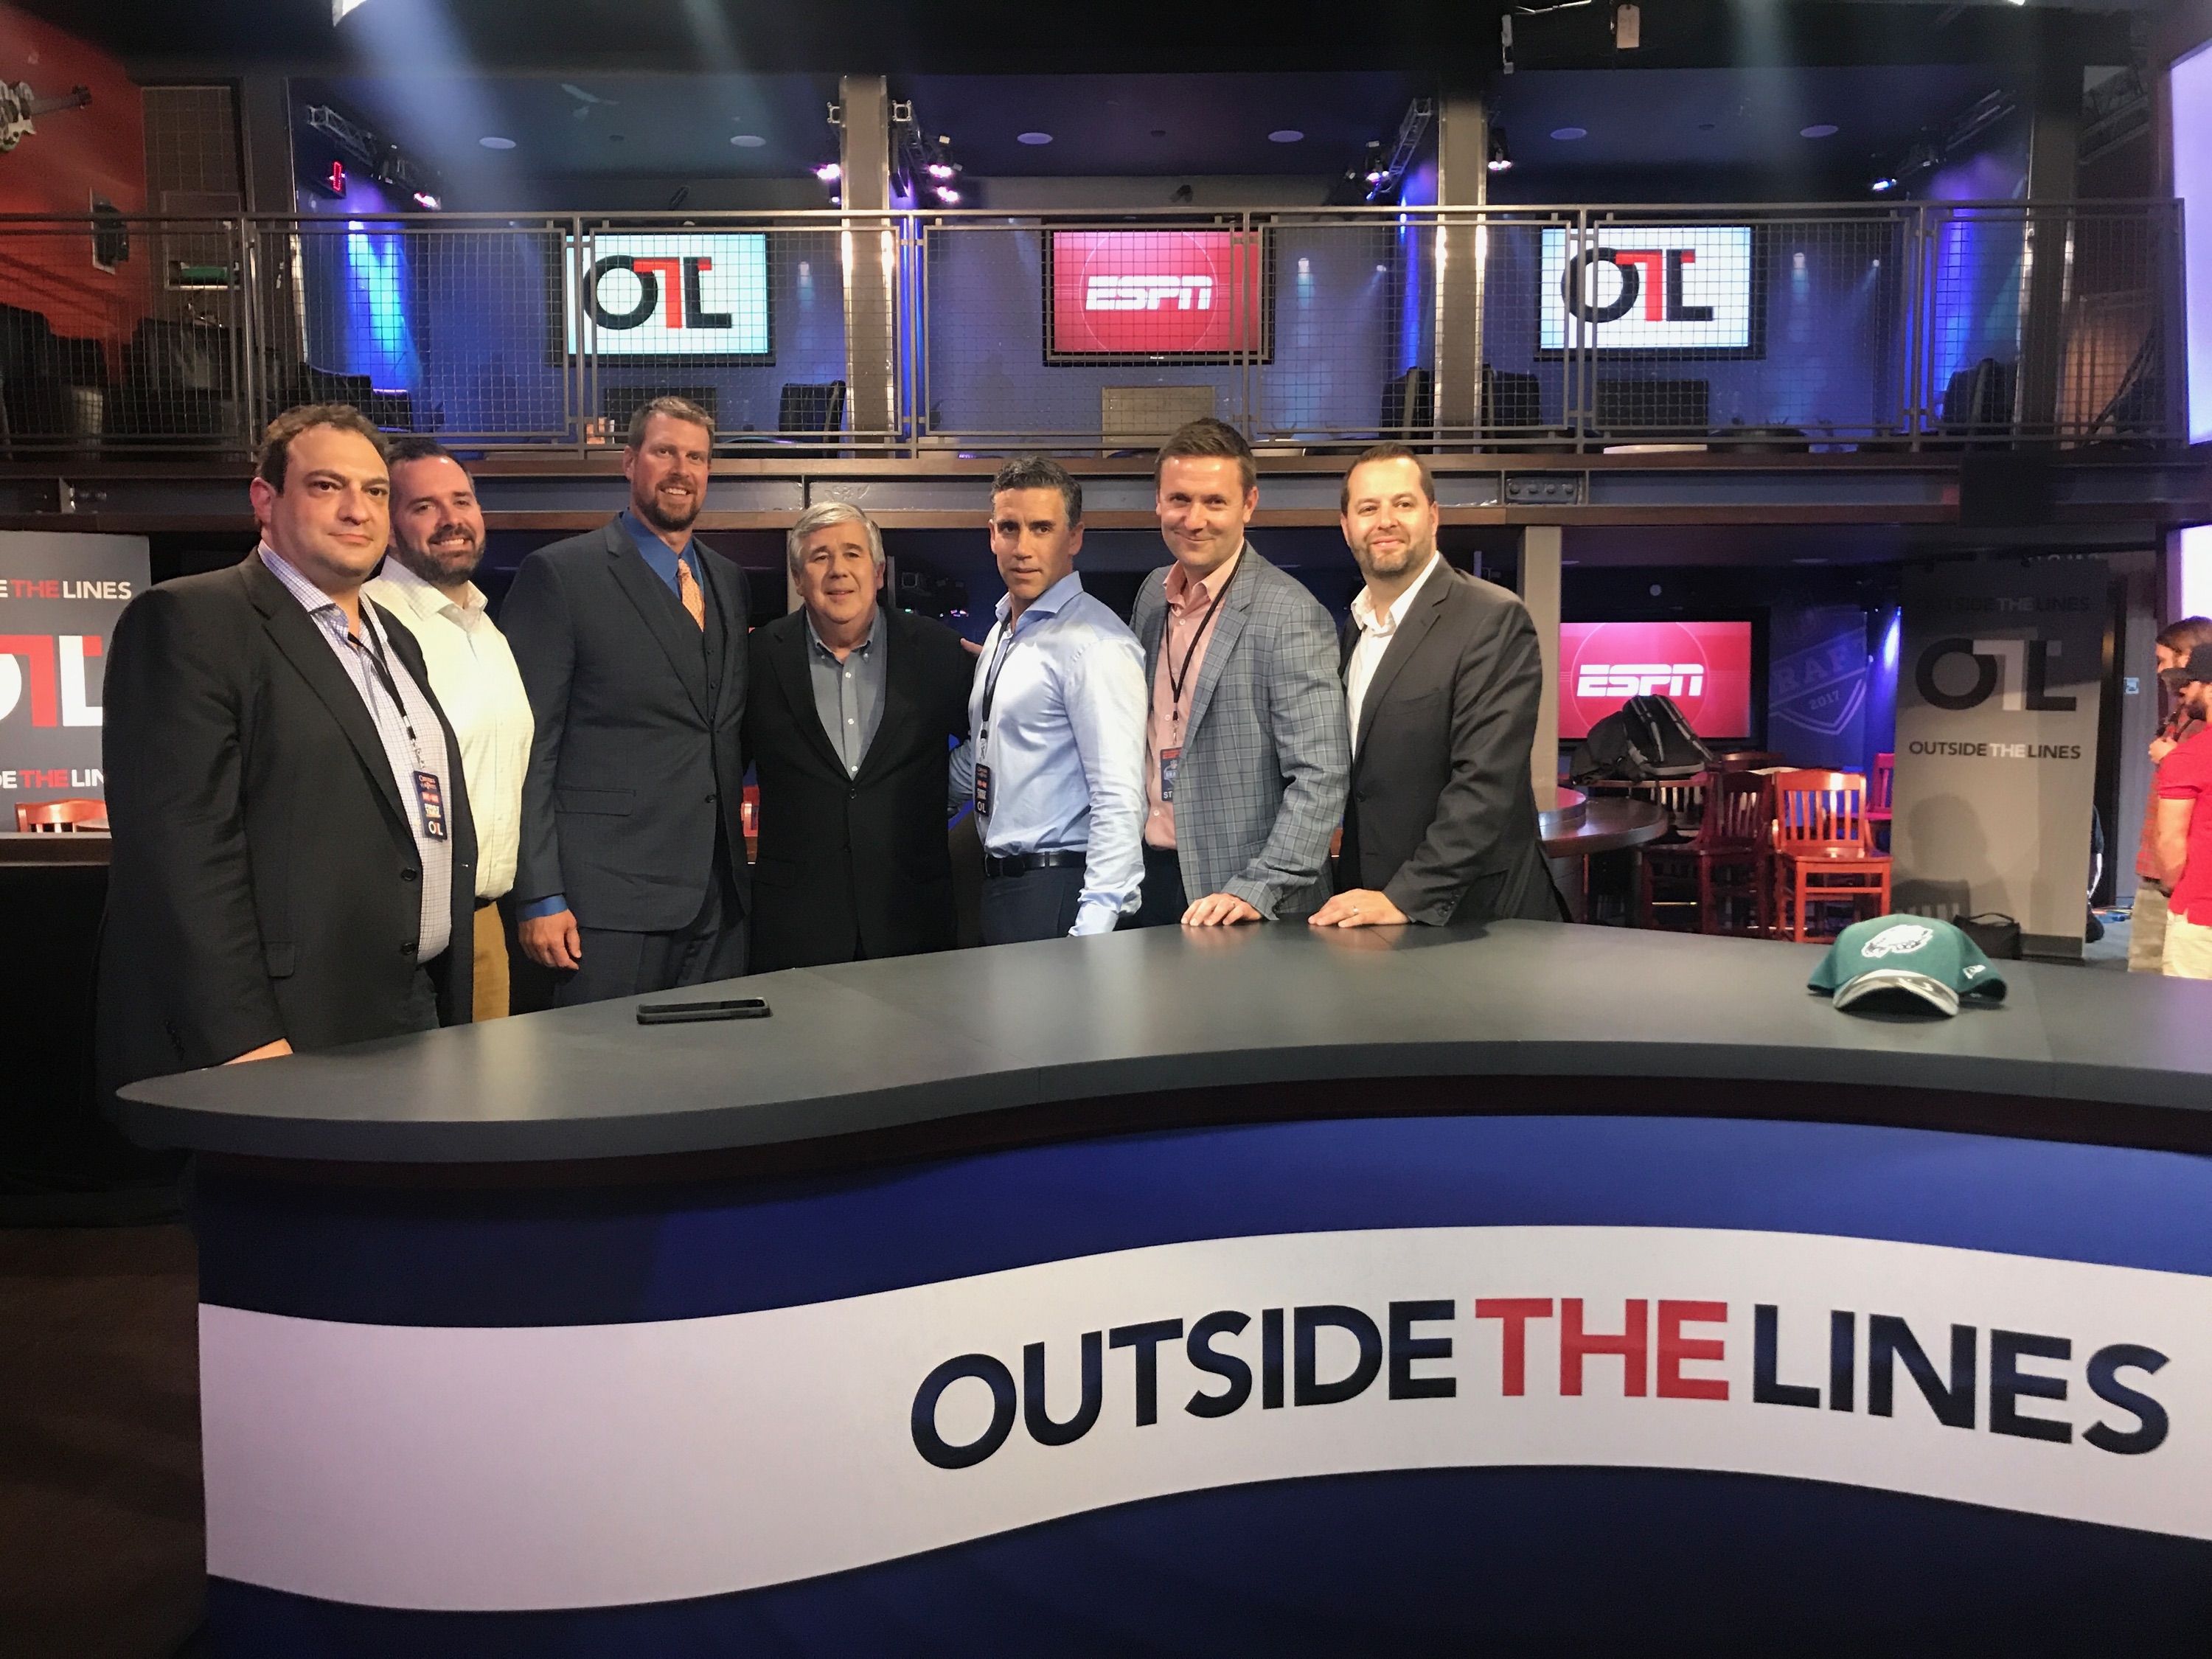 ESPN Producers David Sarosi, Ben Houser and Andy Tennant with Ryan Leaf, Bob Ley, and Ryan Leaf’s team on set of Outside the Lines in Philadelphia. (Molly Mita/ESPN)